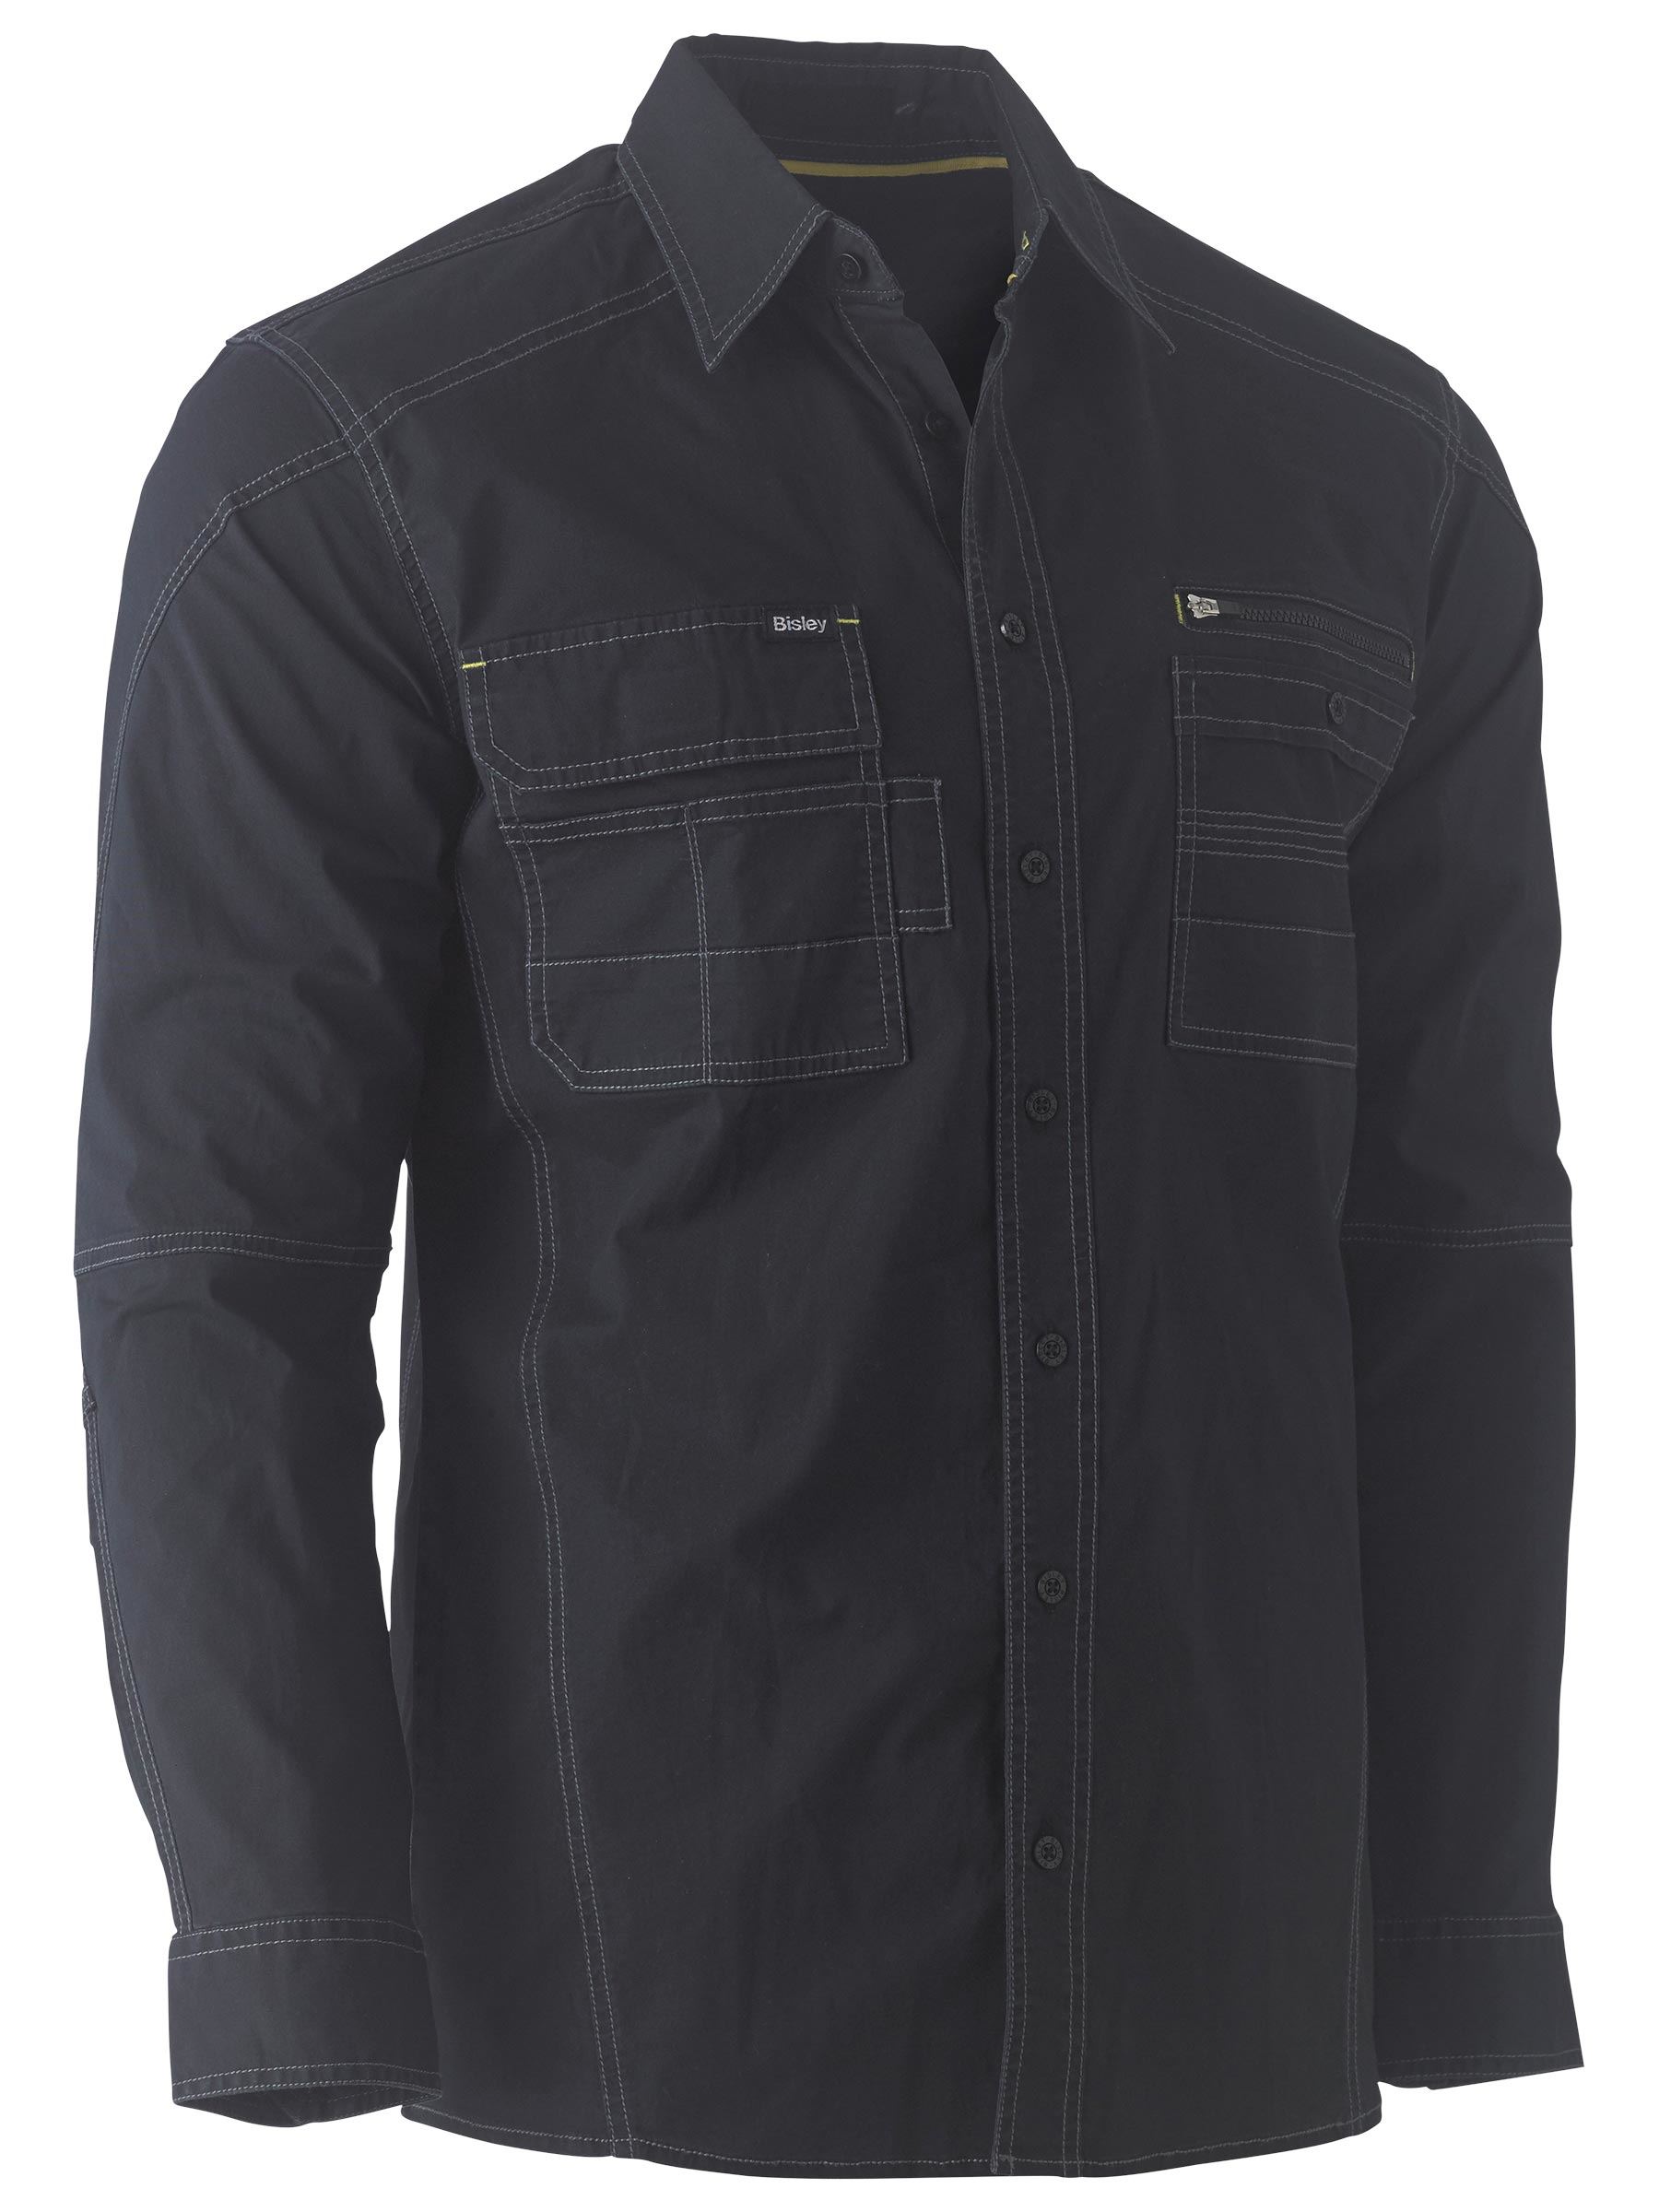 Flx and Move™ Long Sleeve Utility Work Shirt - BS6144 - Bisley Workwear